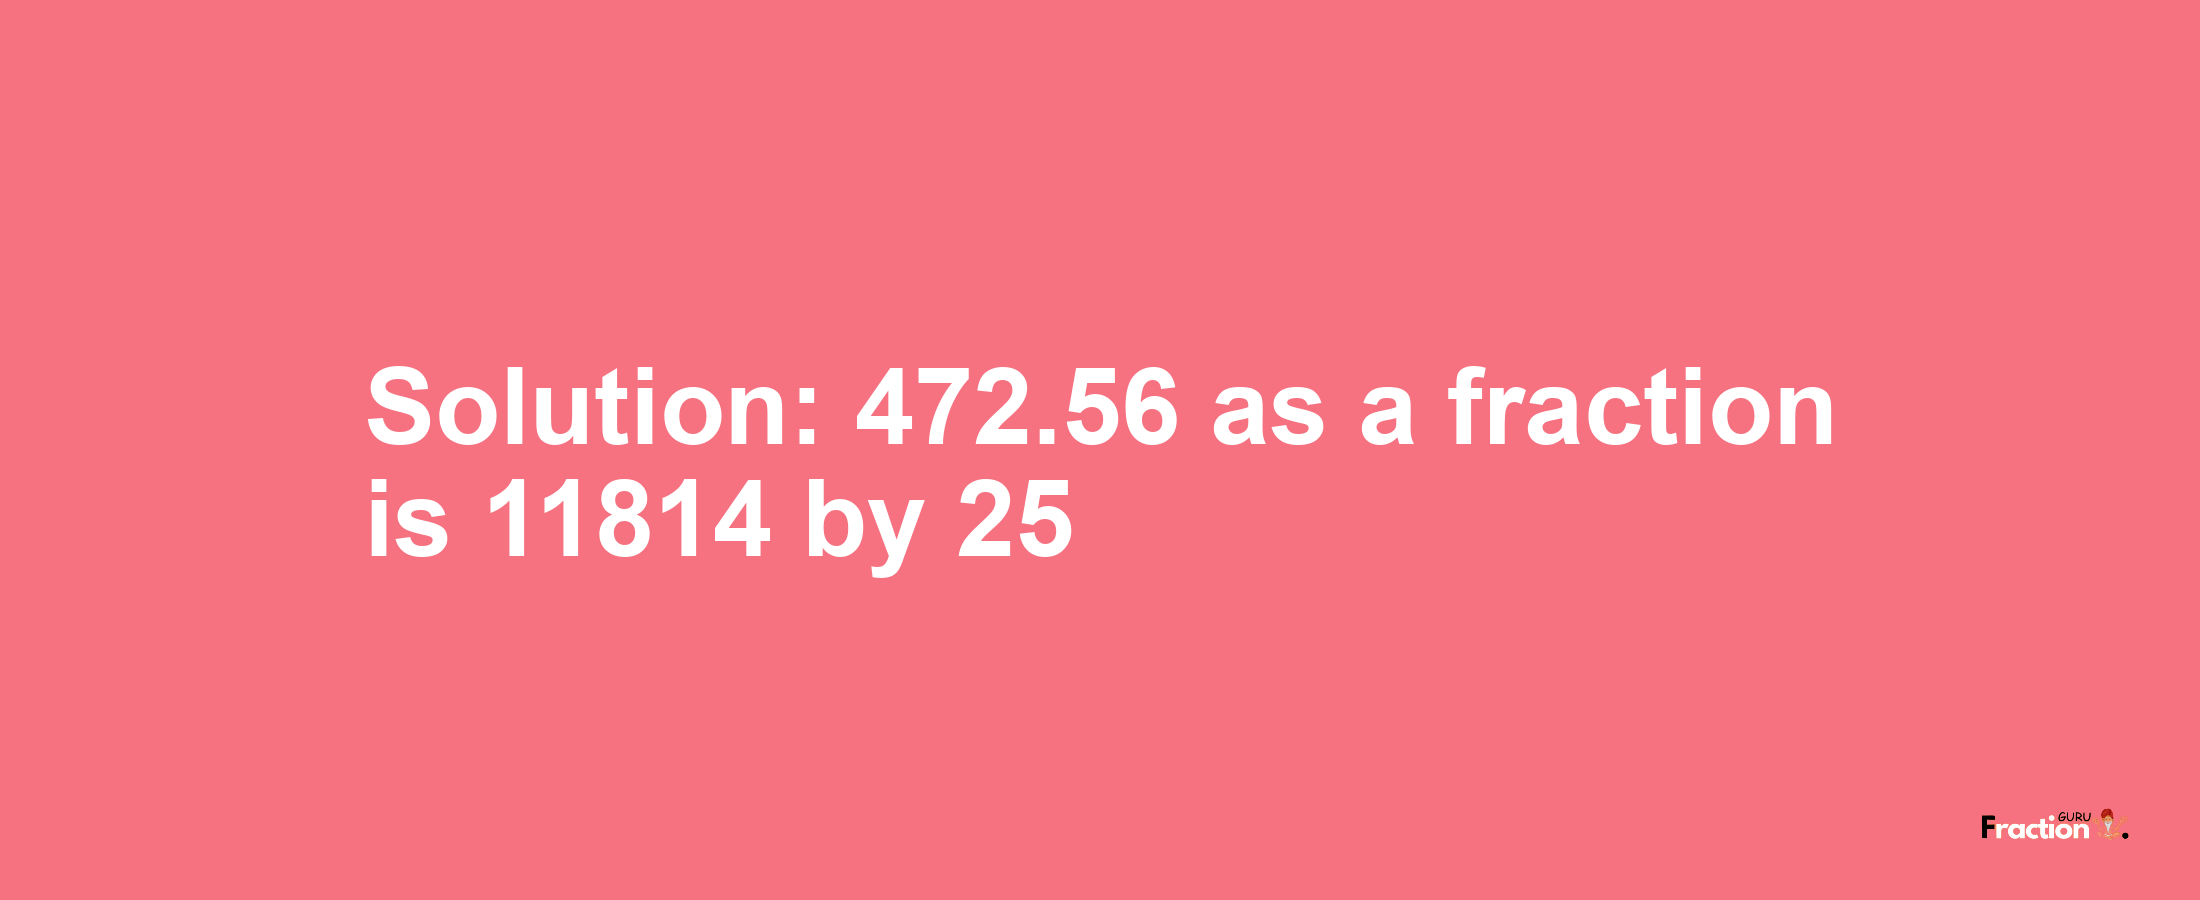 Solution:472.56 as a fraction is 11814/25